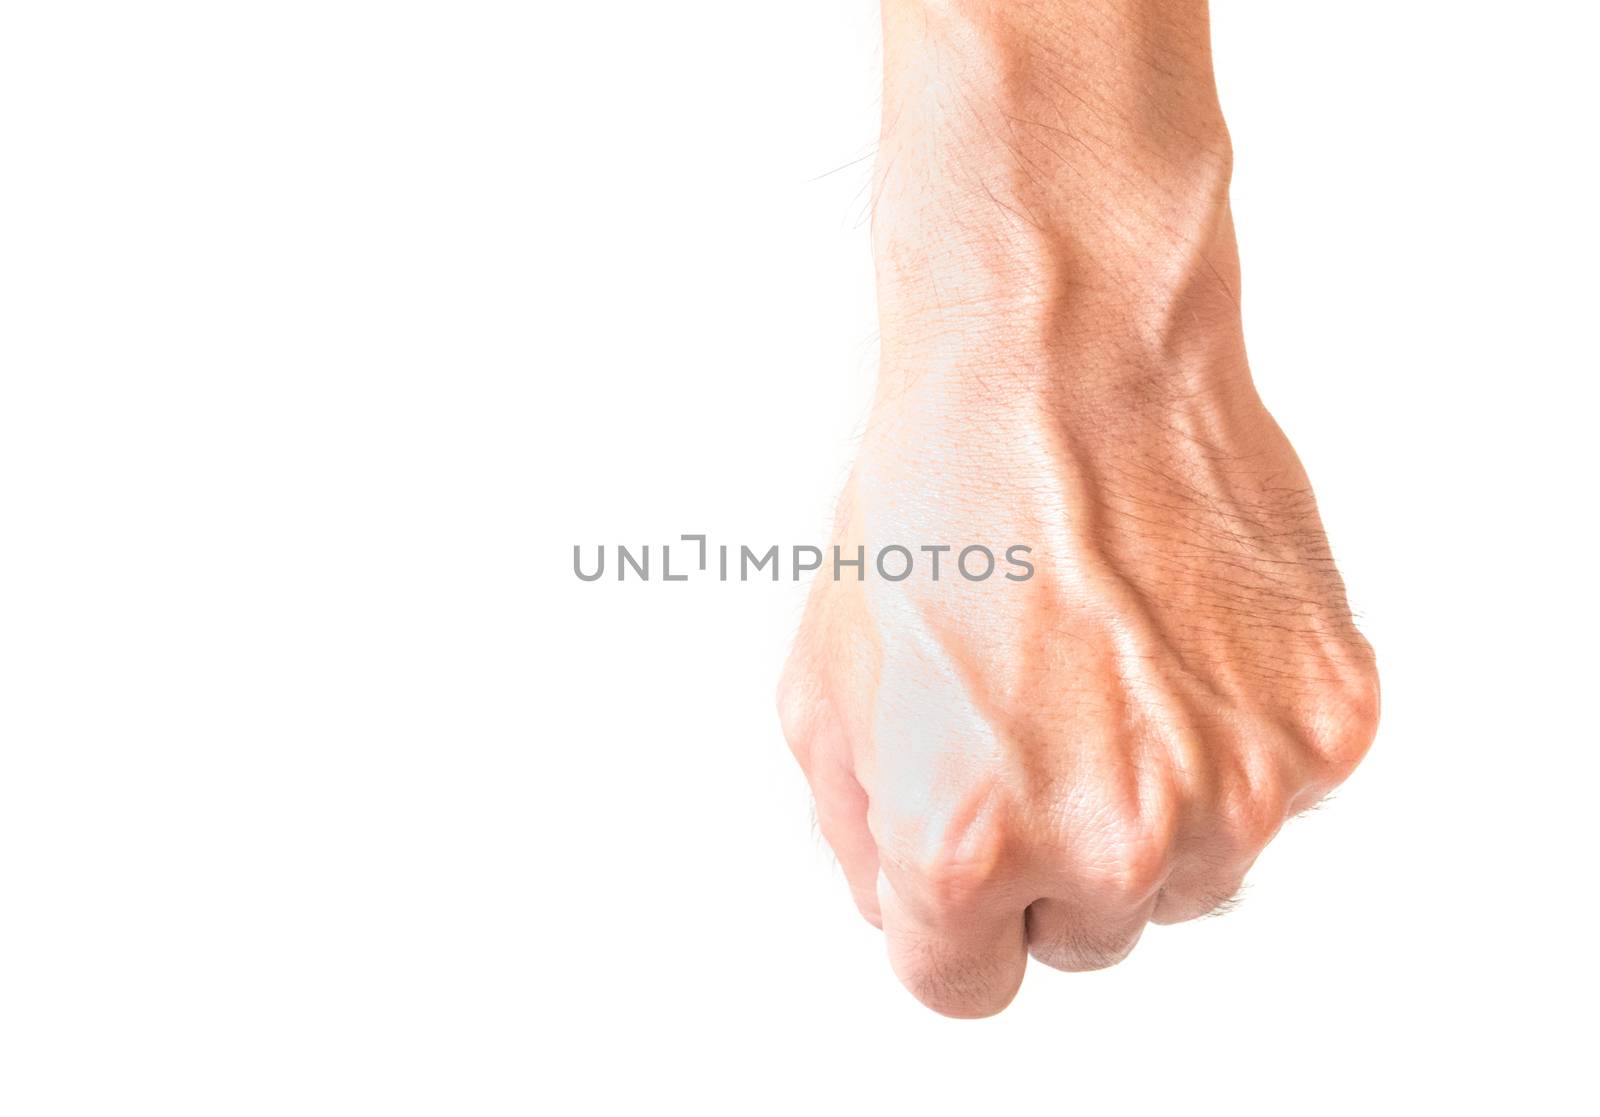 Man arm with blood veins on white background, health care concept